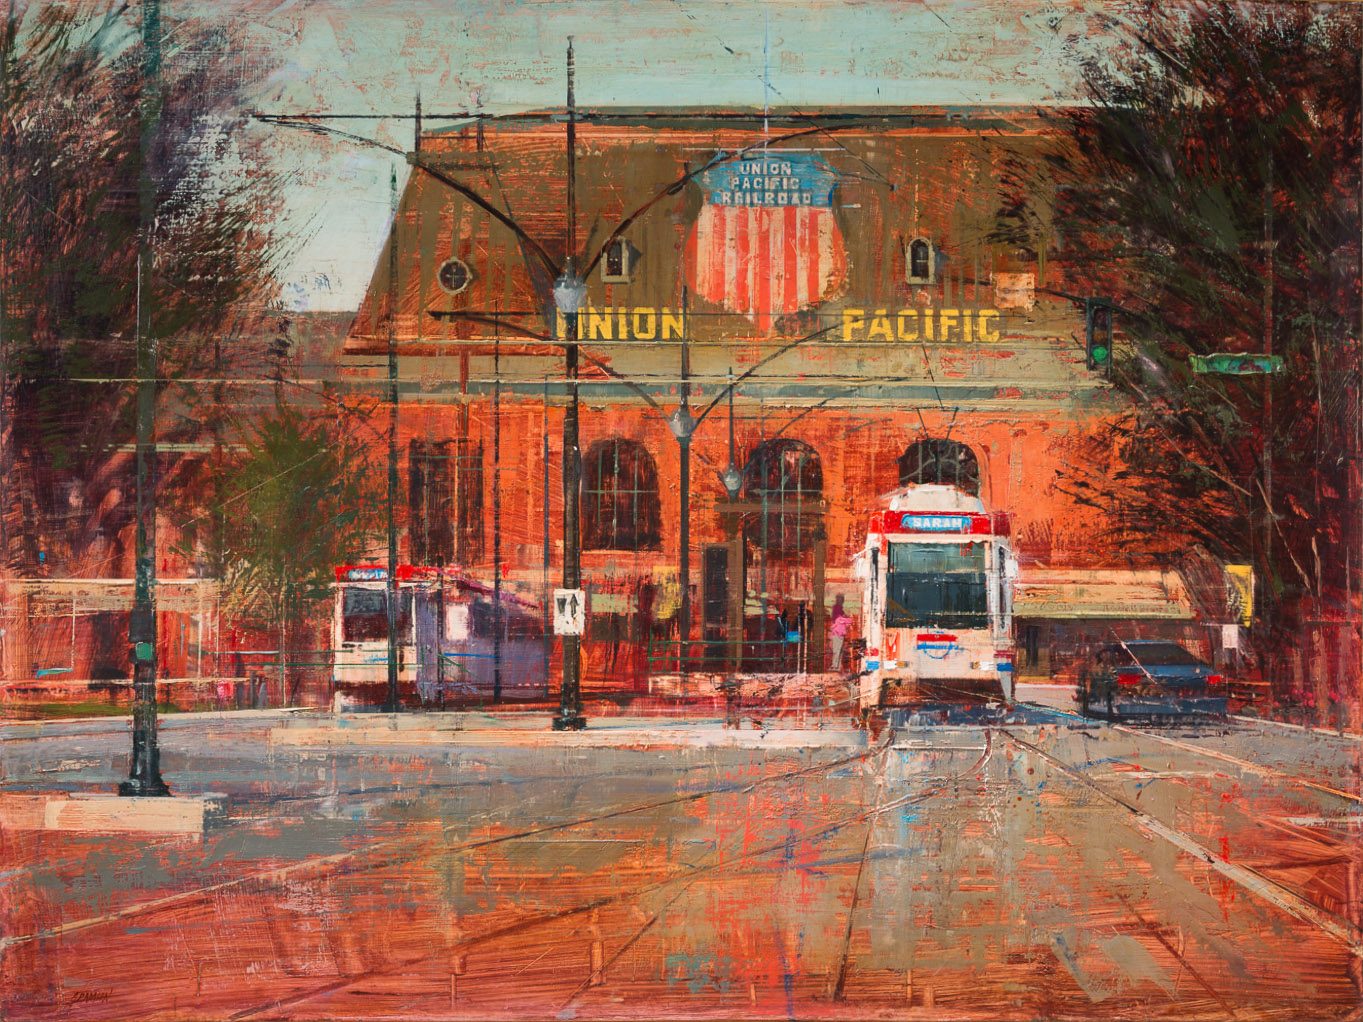 Union Pacific Station